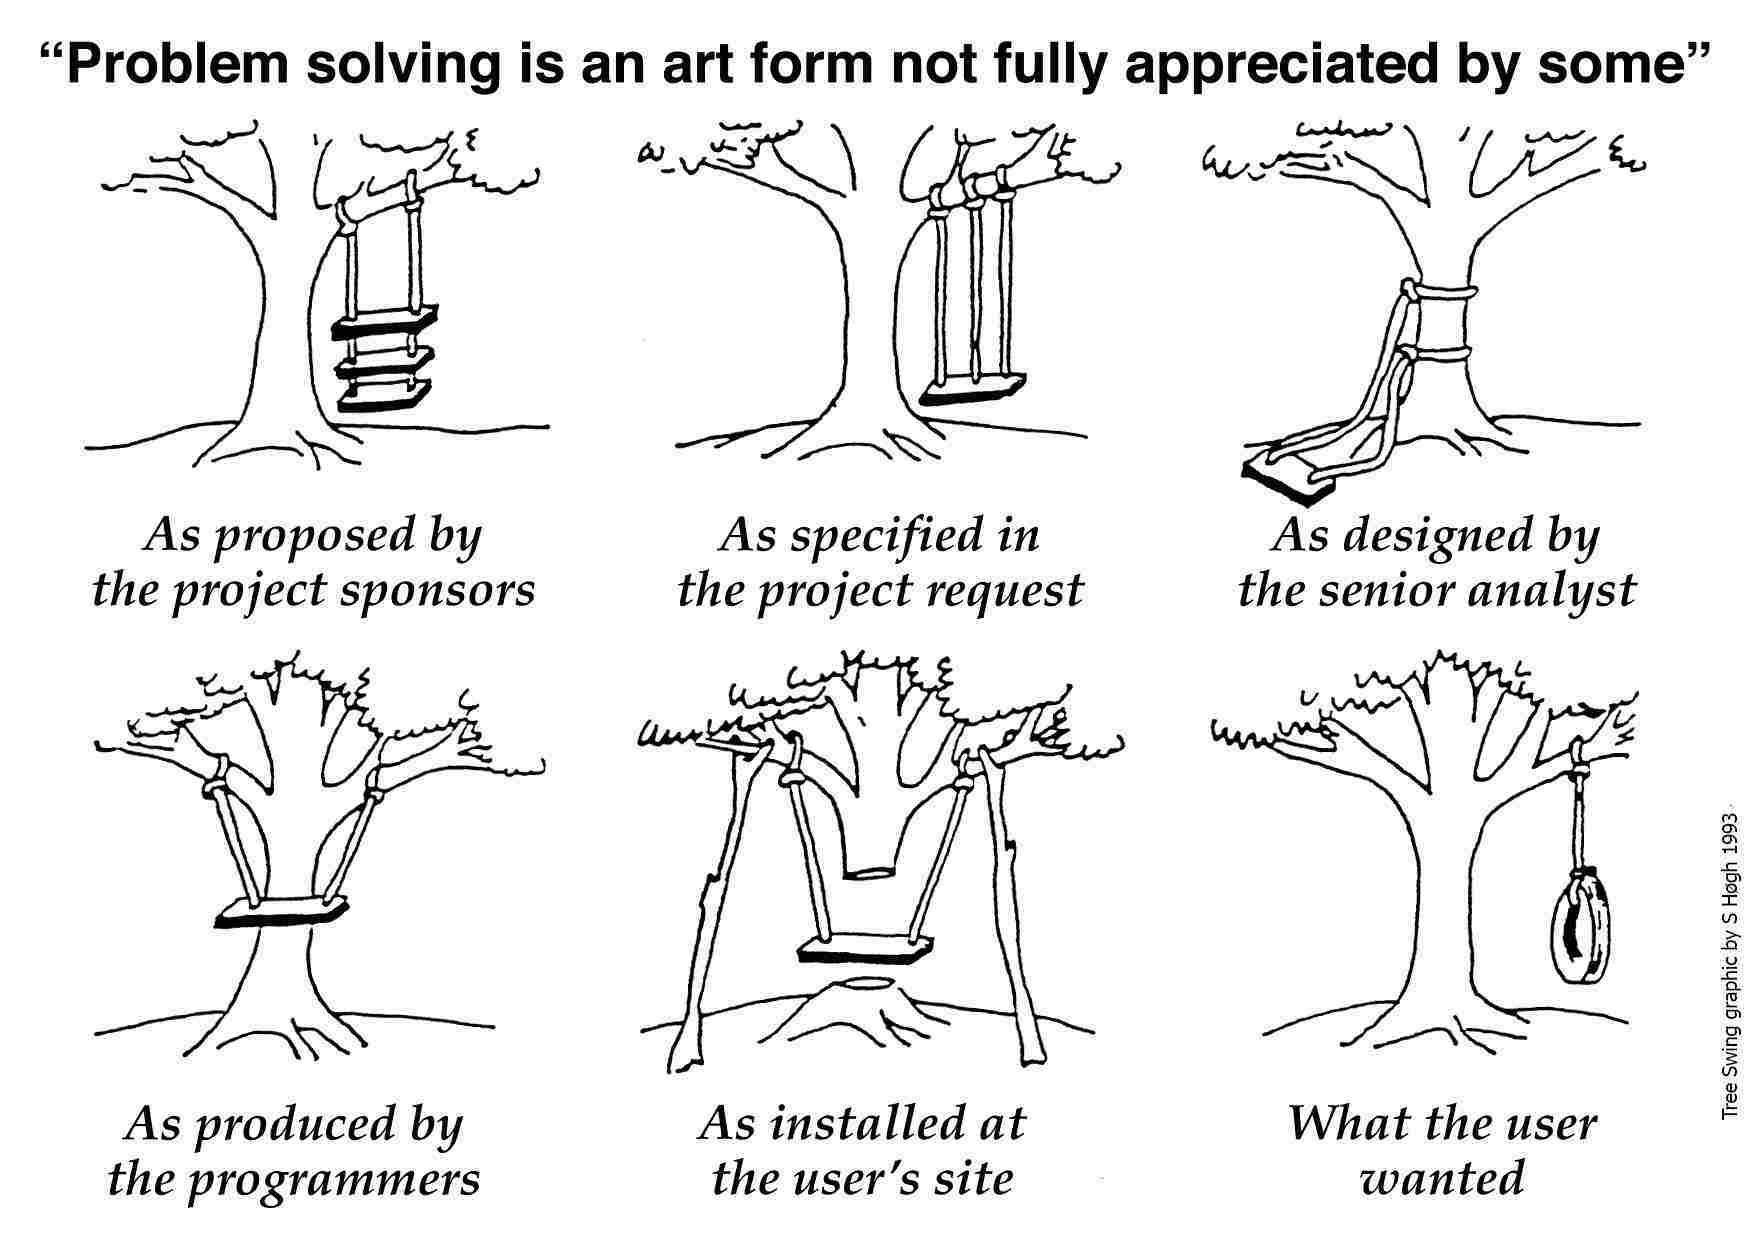 Comic Strip: Problem Solving is an Art Form Not Fully Appreciated by Some